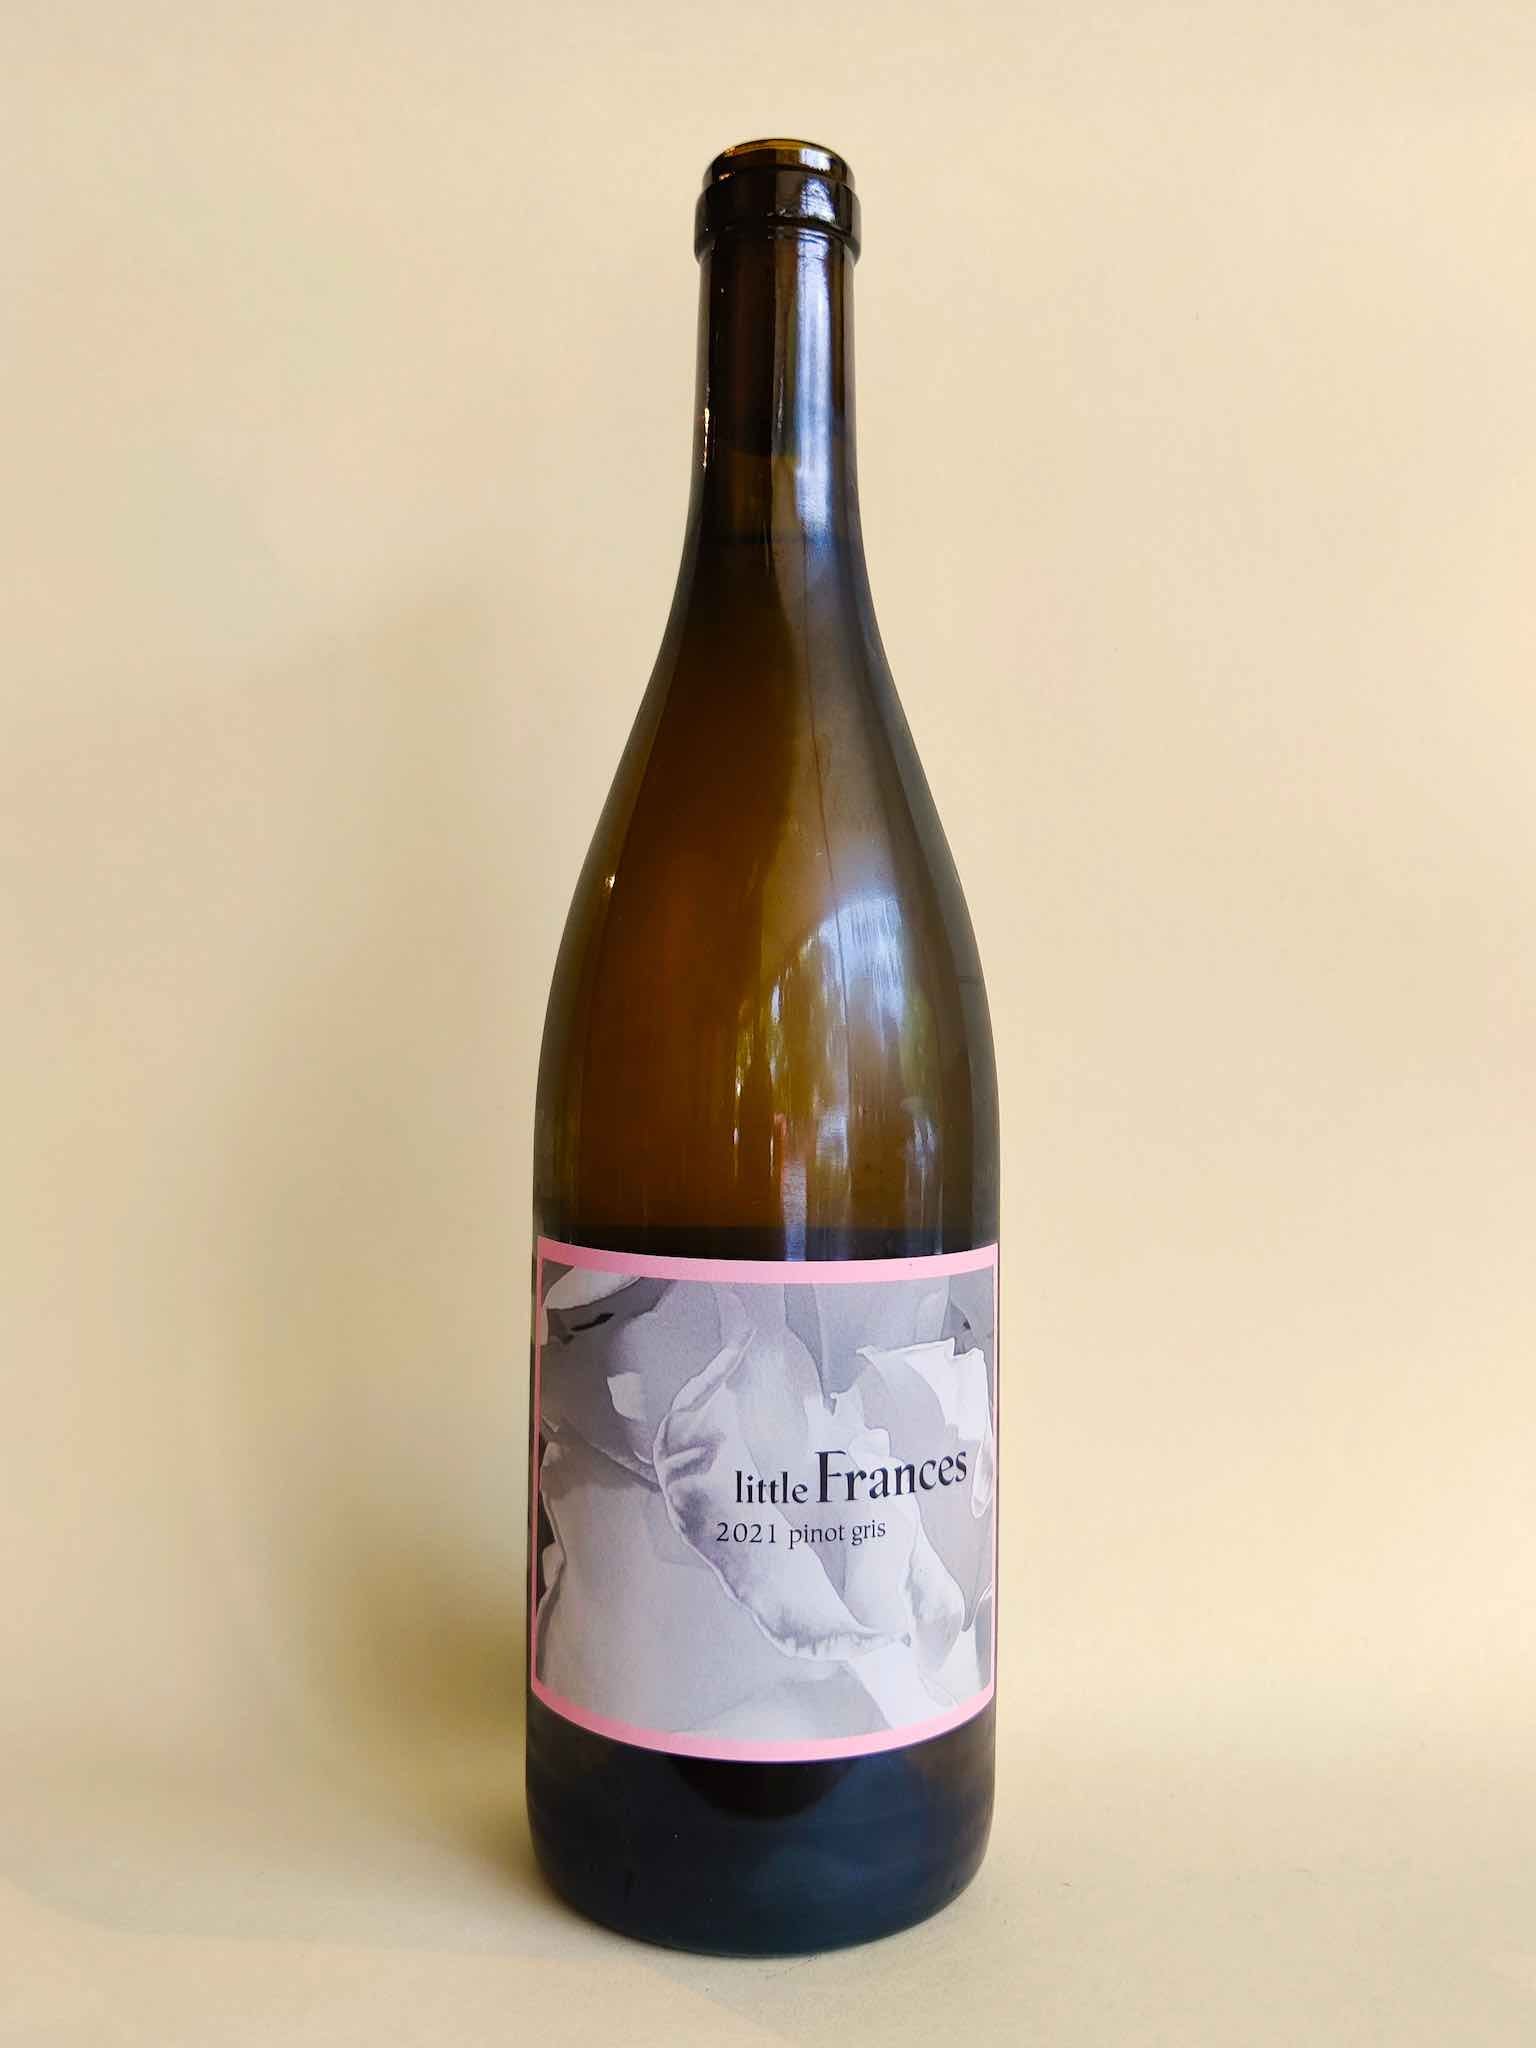 A bottle of 2021 Little Frances Pinot Gris from Benalla, Victoria. 